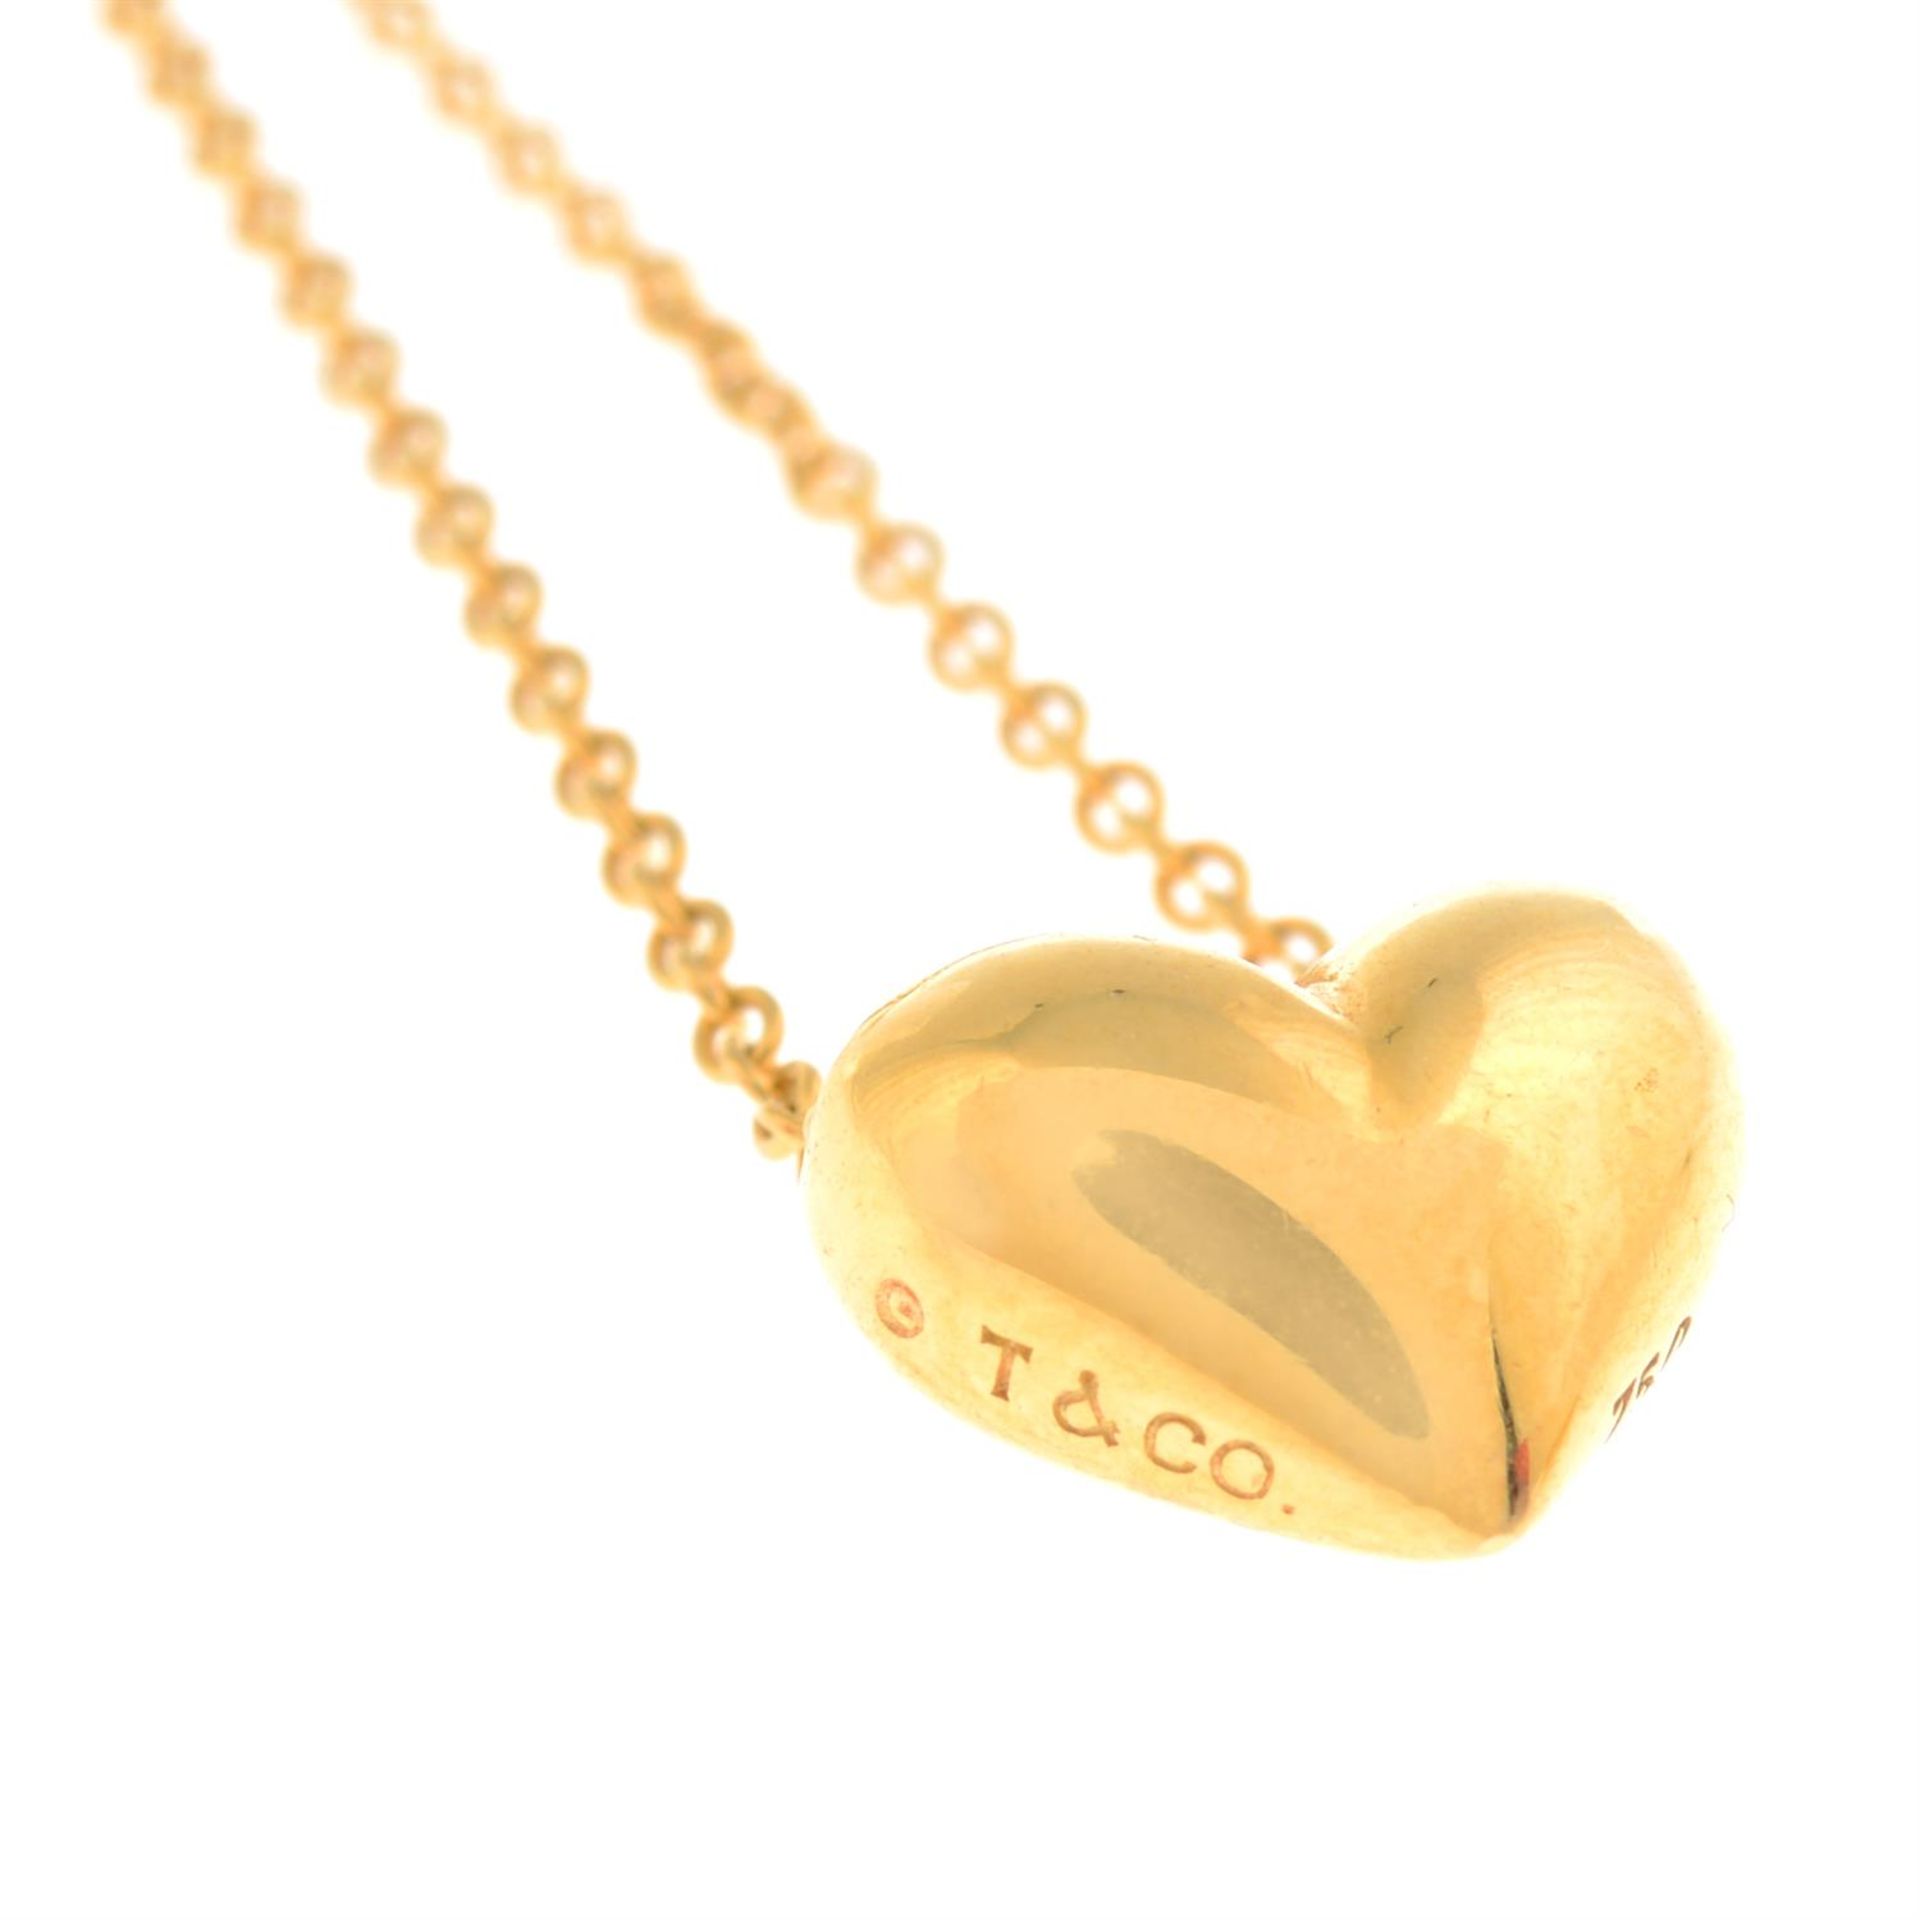 A heart pendant, with chain, by Tiffany & Co. - Image 4 of 4